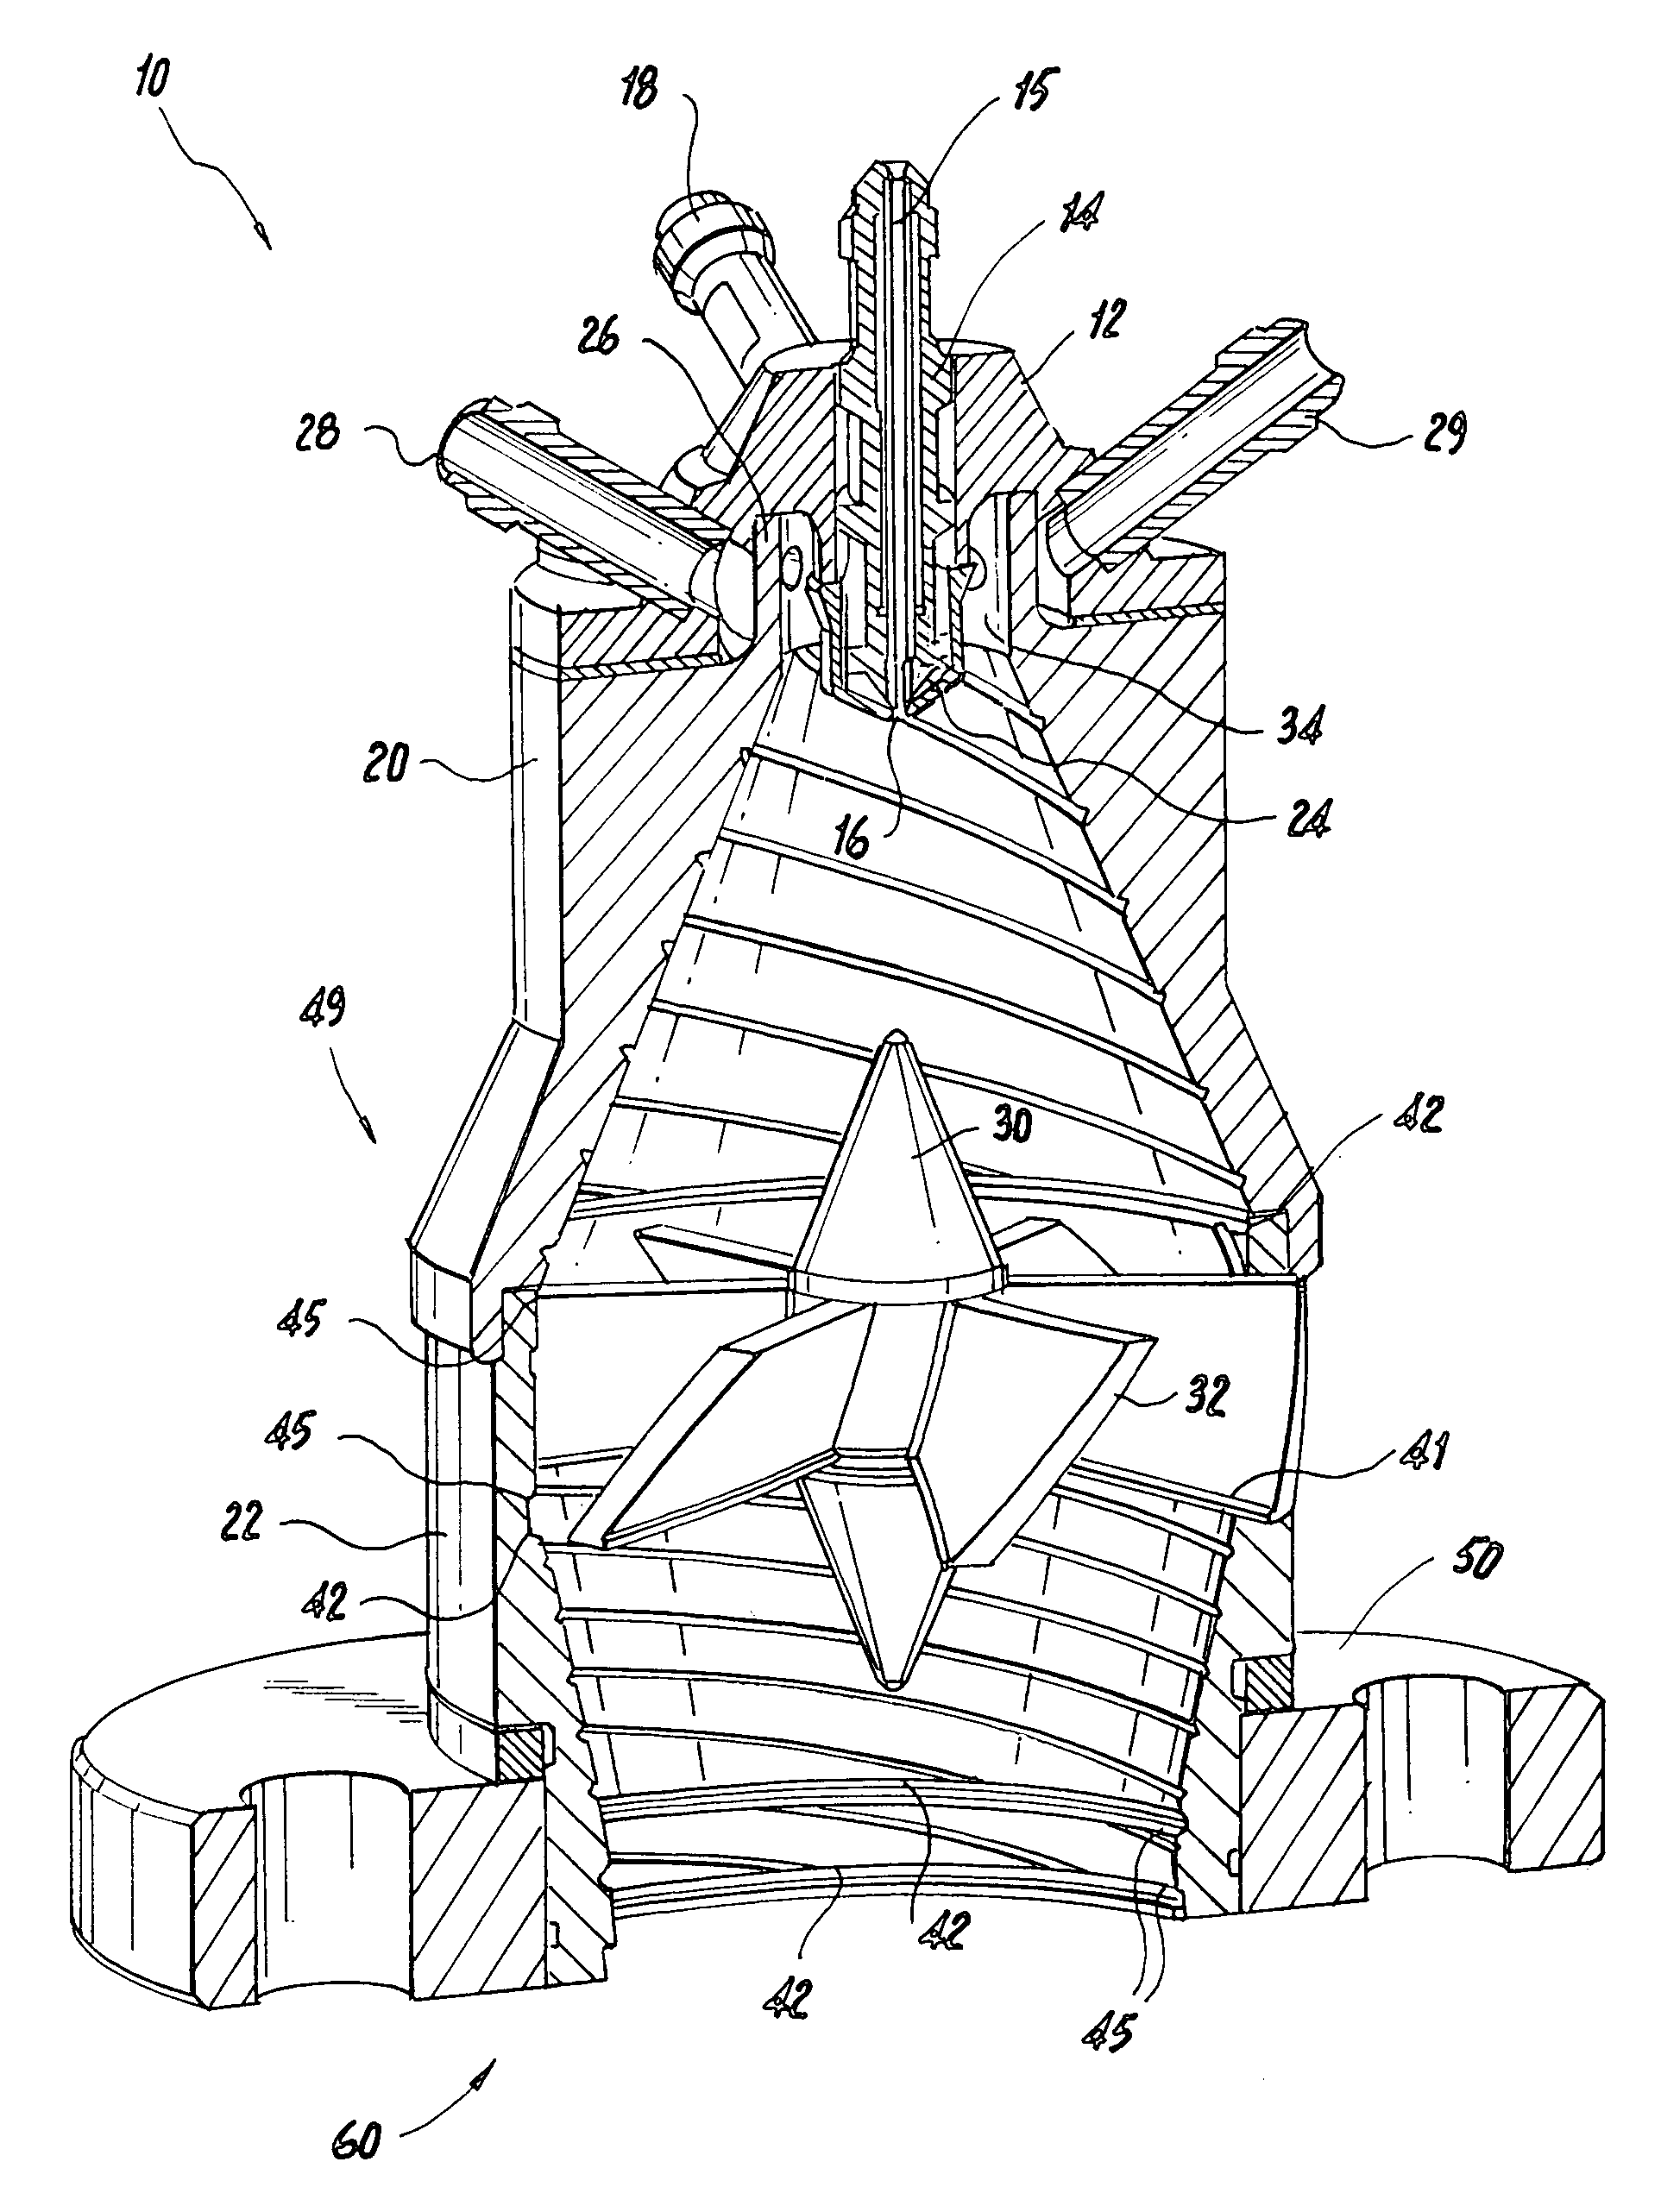 Integrated fuel injection and mixing systems for fuel reformers and methods of using the same